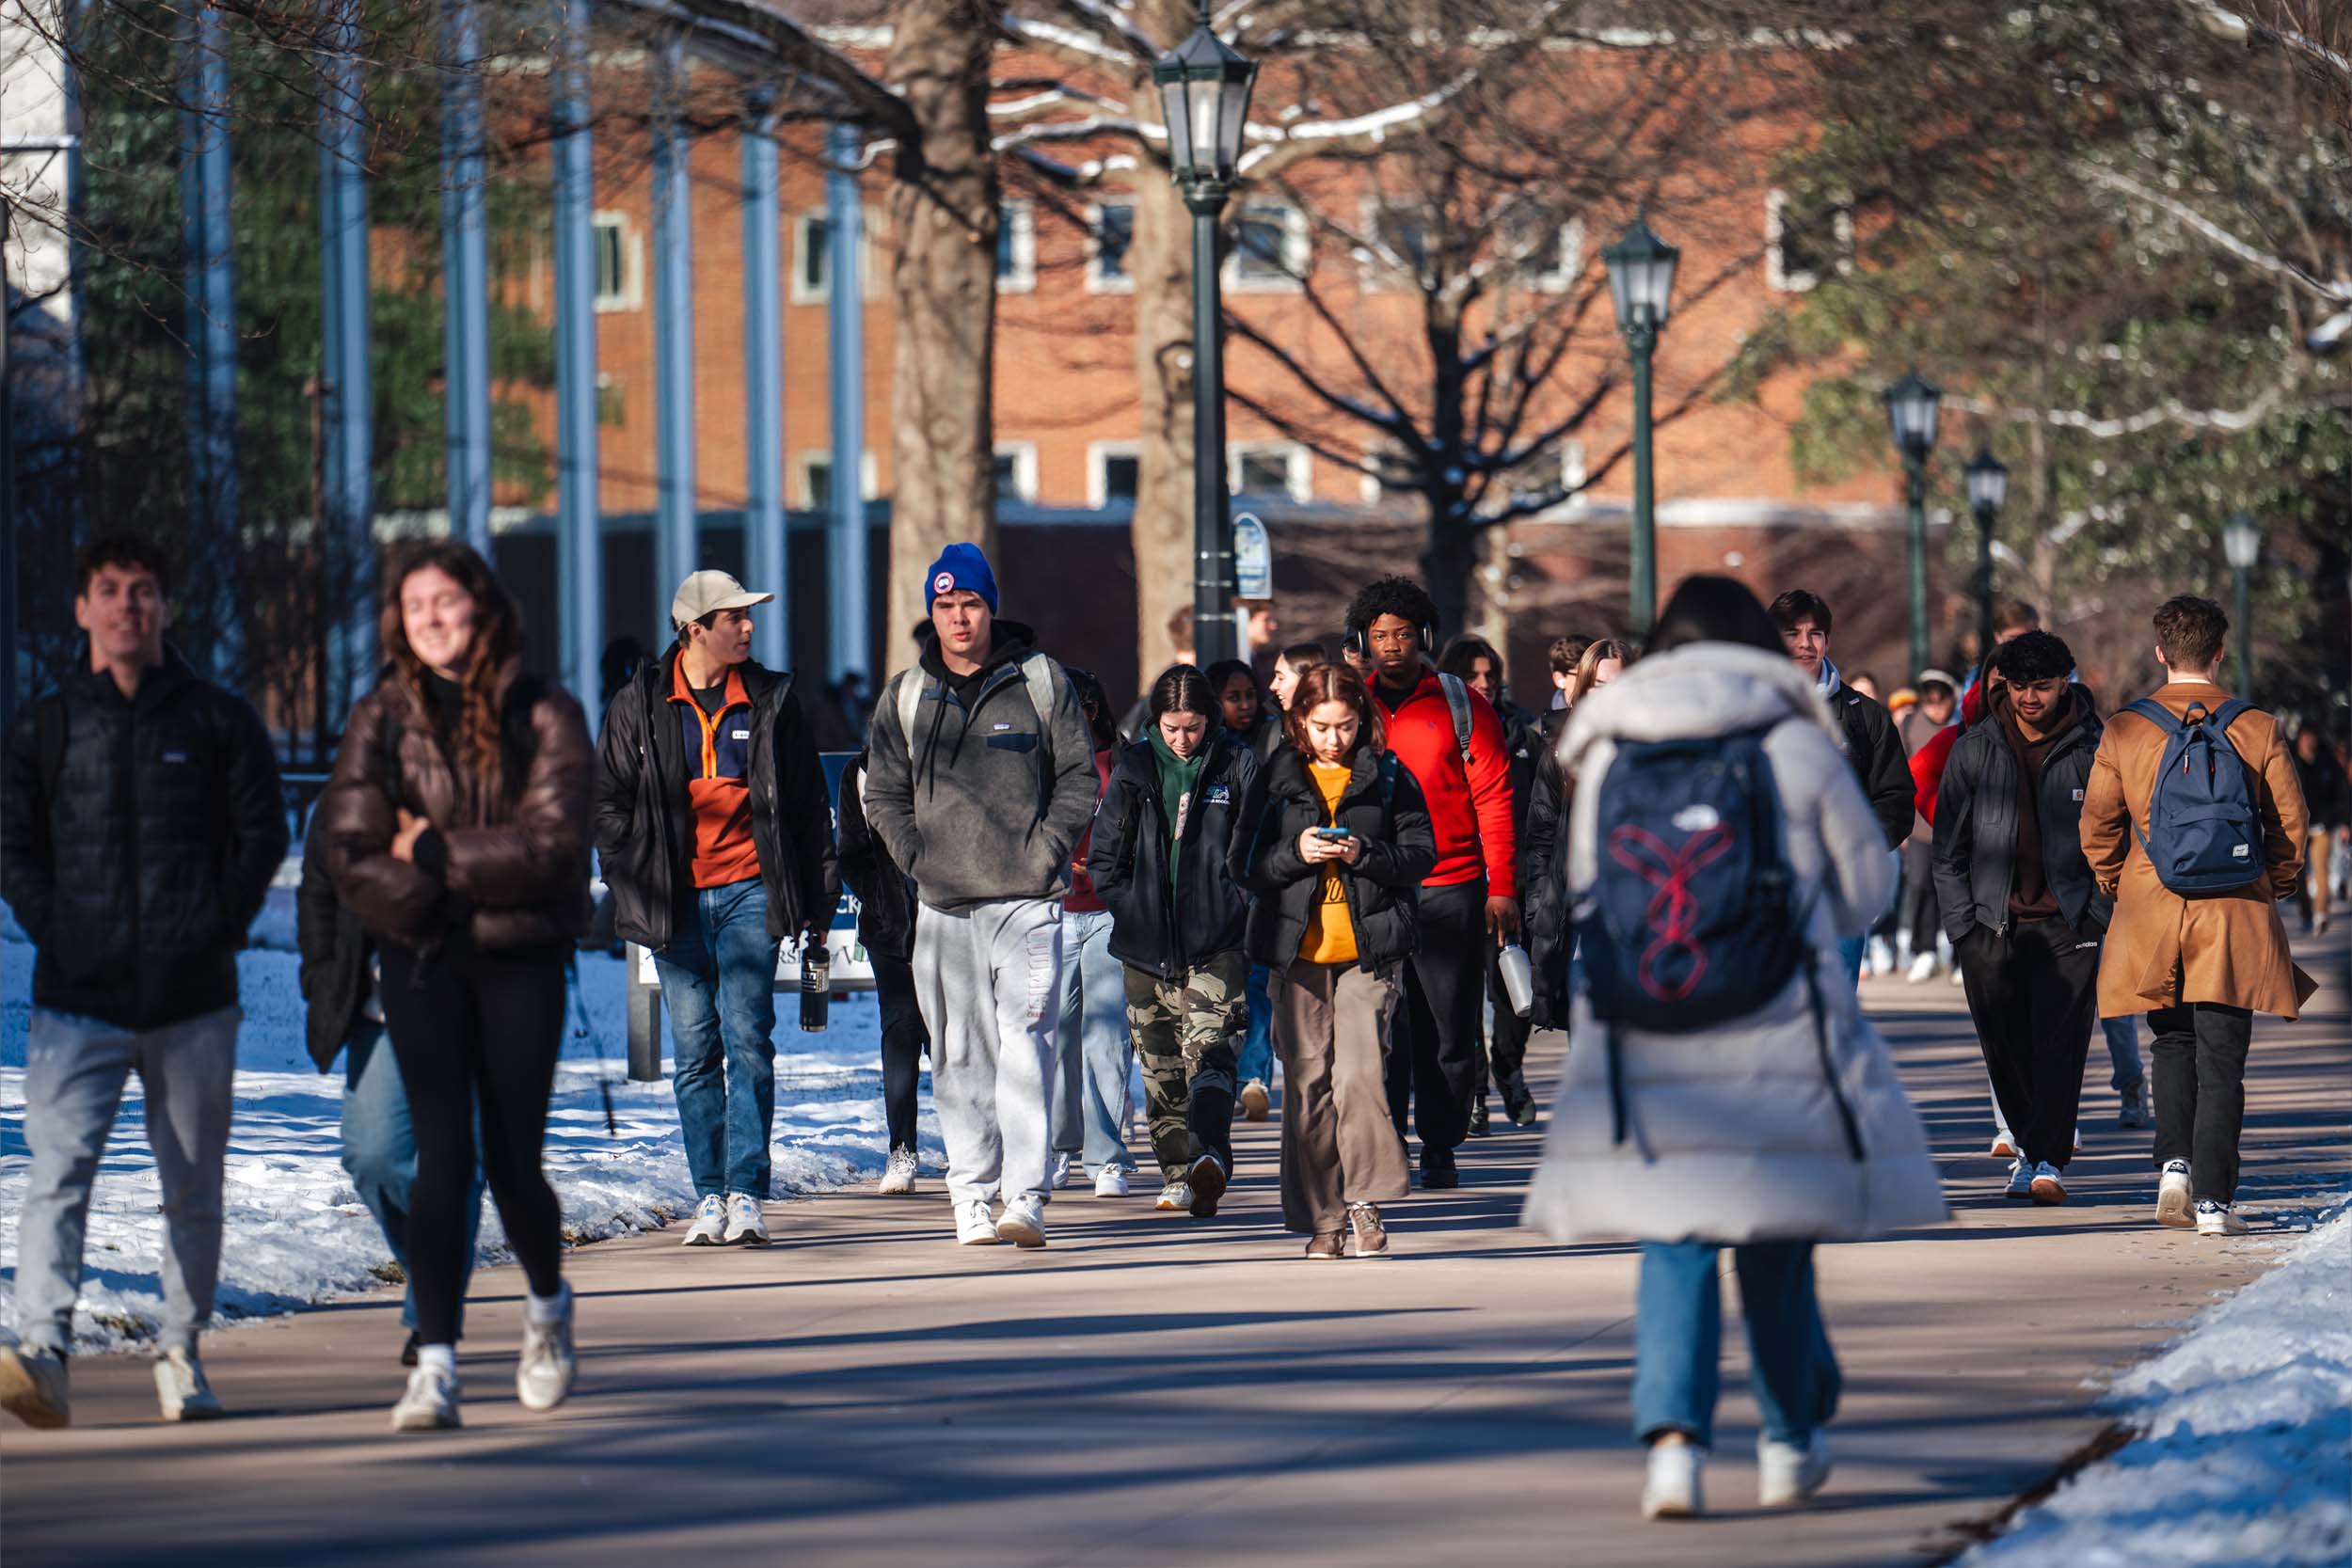 Students walking to class in the cold/winter